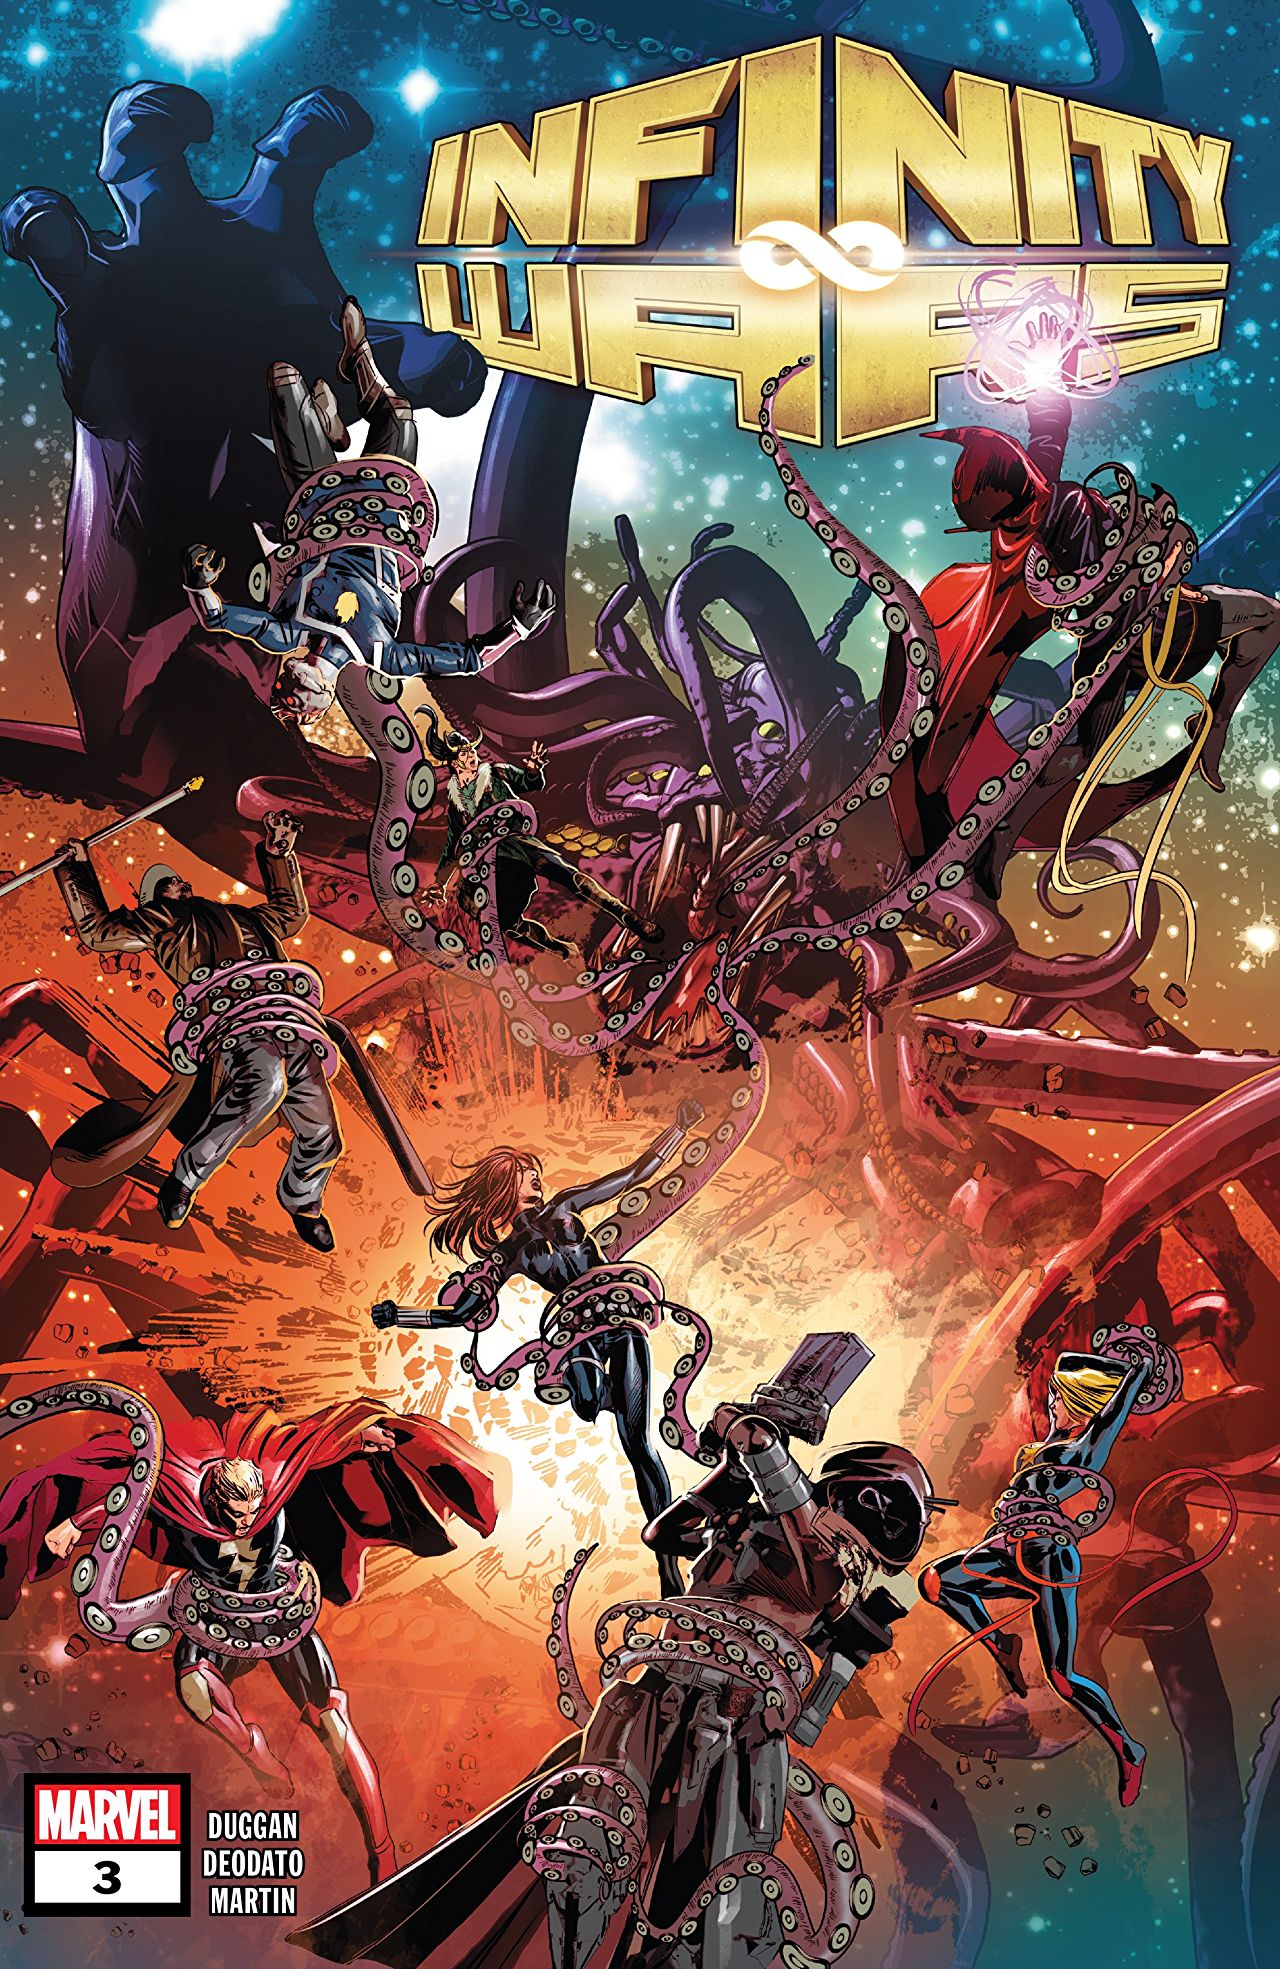 Infinity Wars #3 review: Who has control?